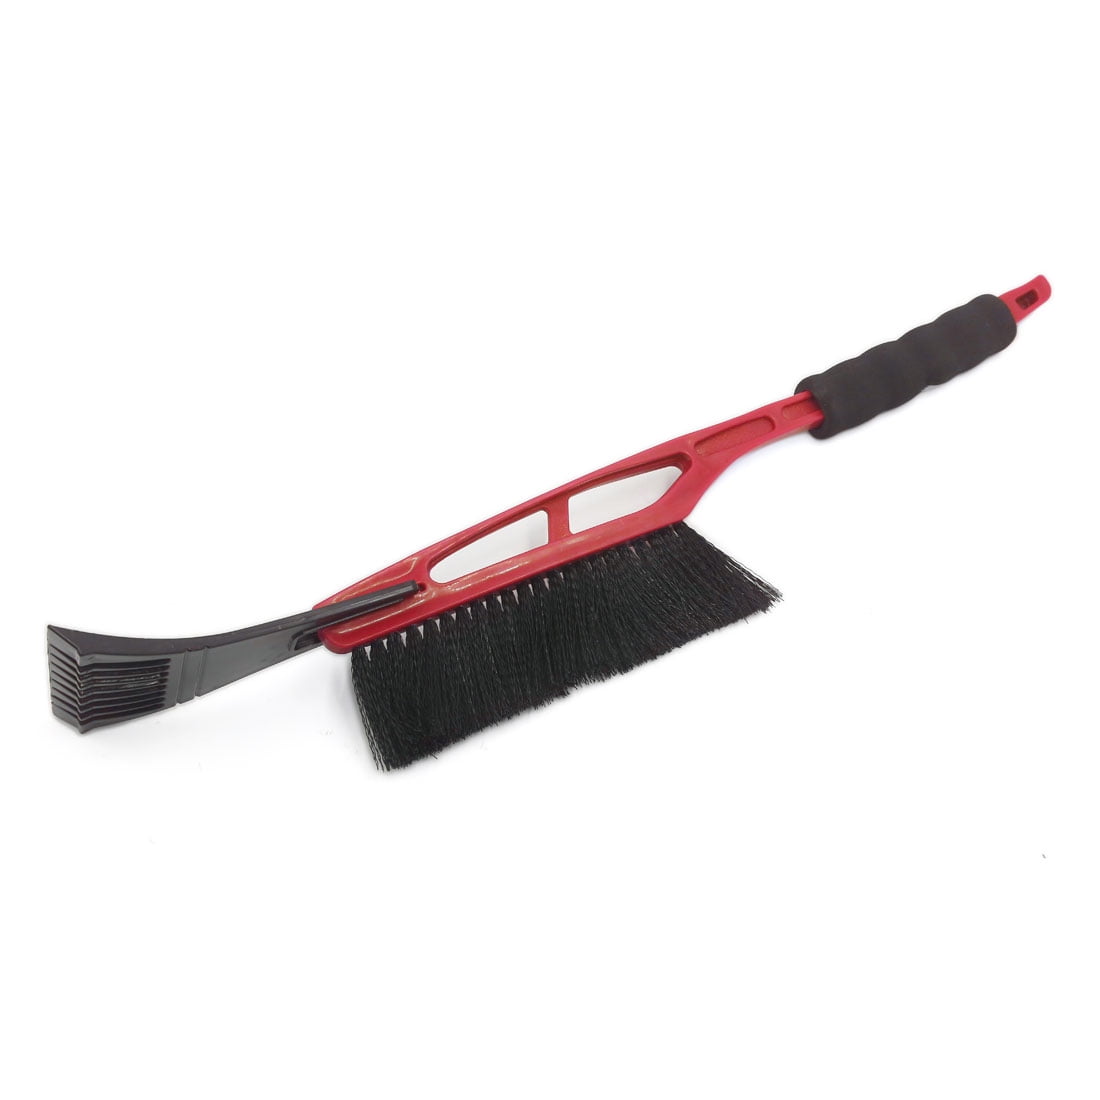 Removable Use Strengthened Aluminum Alloy Hand Rod and Foam Grip 34.6 to 48.8 Extendable Auto Snow Removal Broom with Ice Scraper Car Snow Brush and Ice Scraper